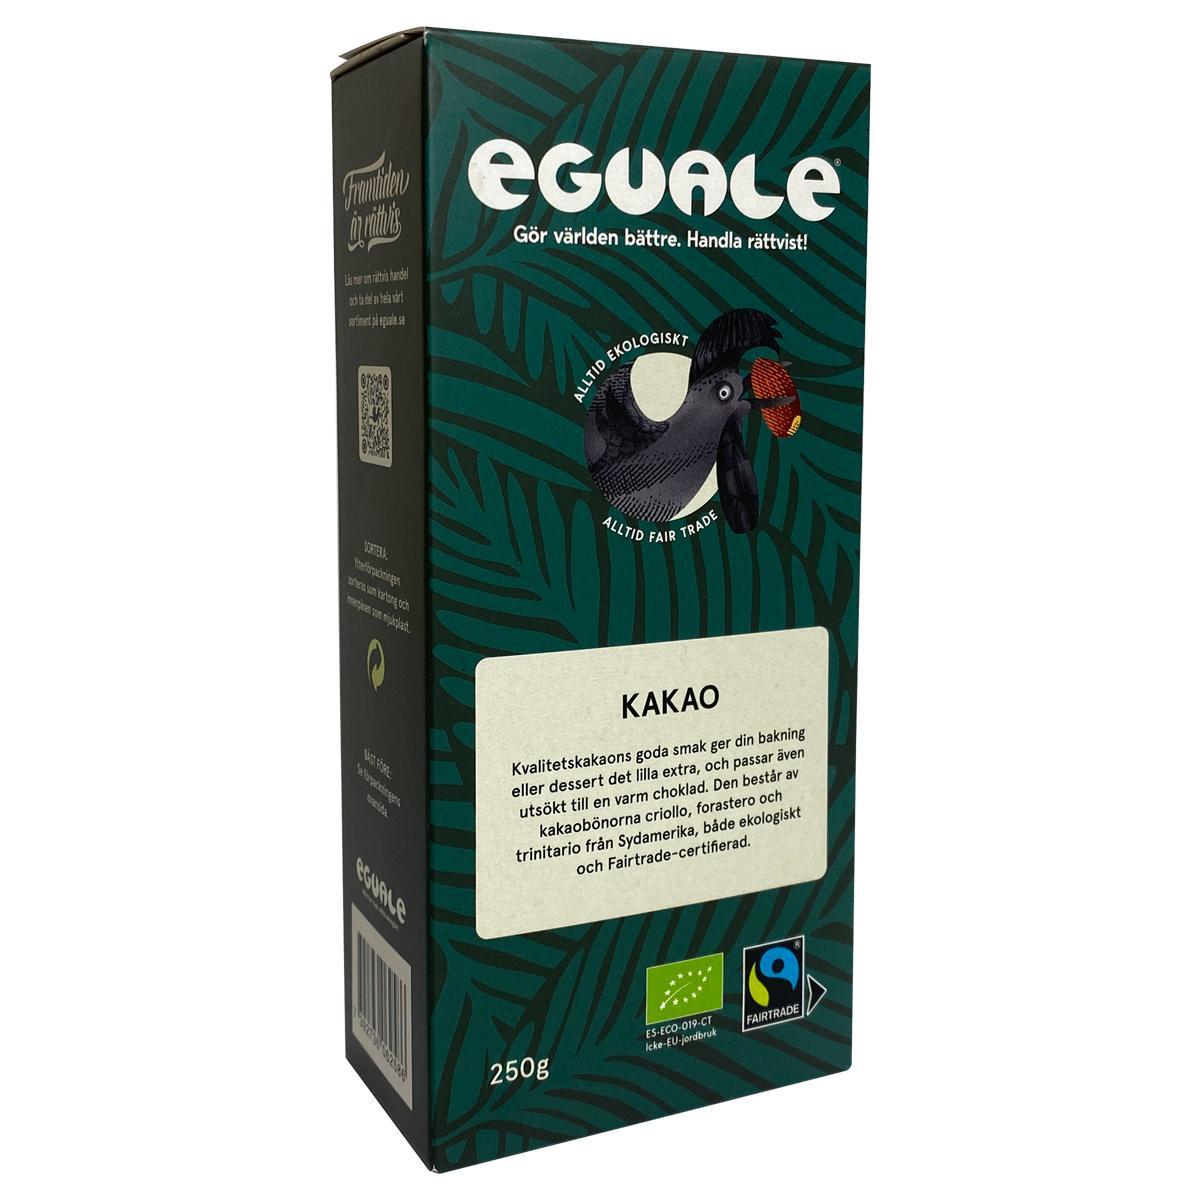 Eguale's Eguale cocoa'